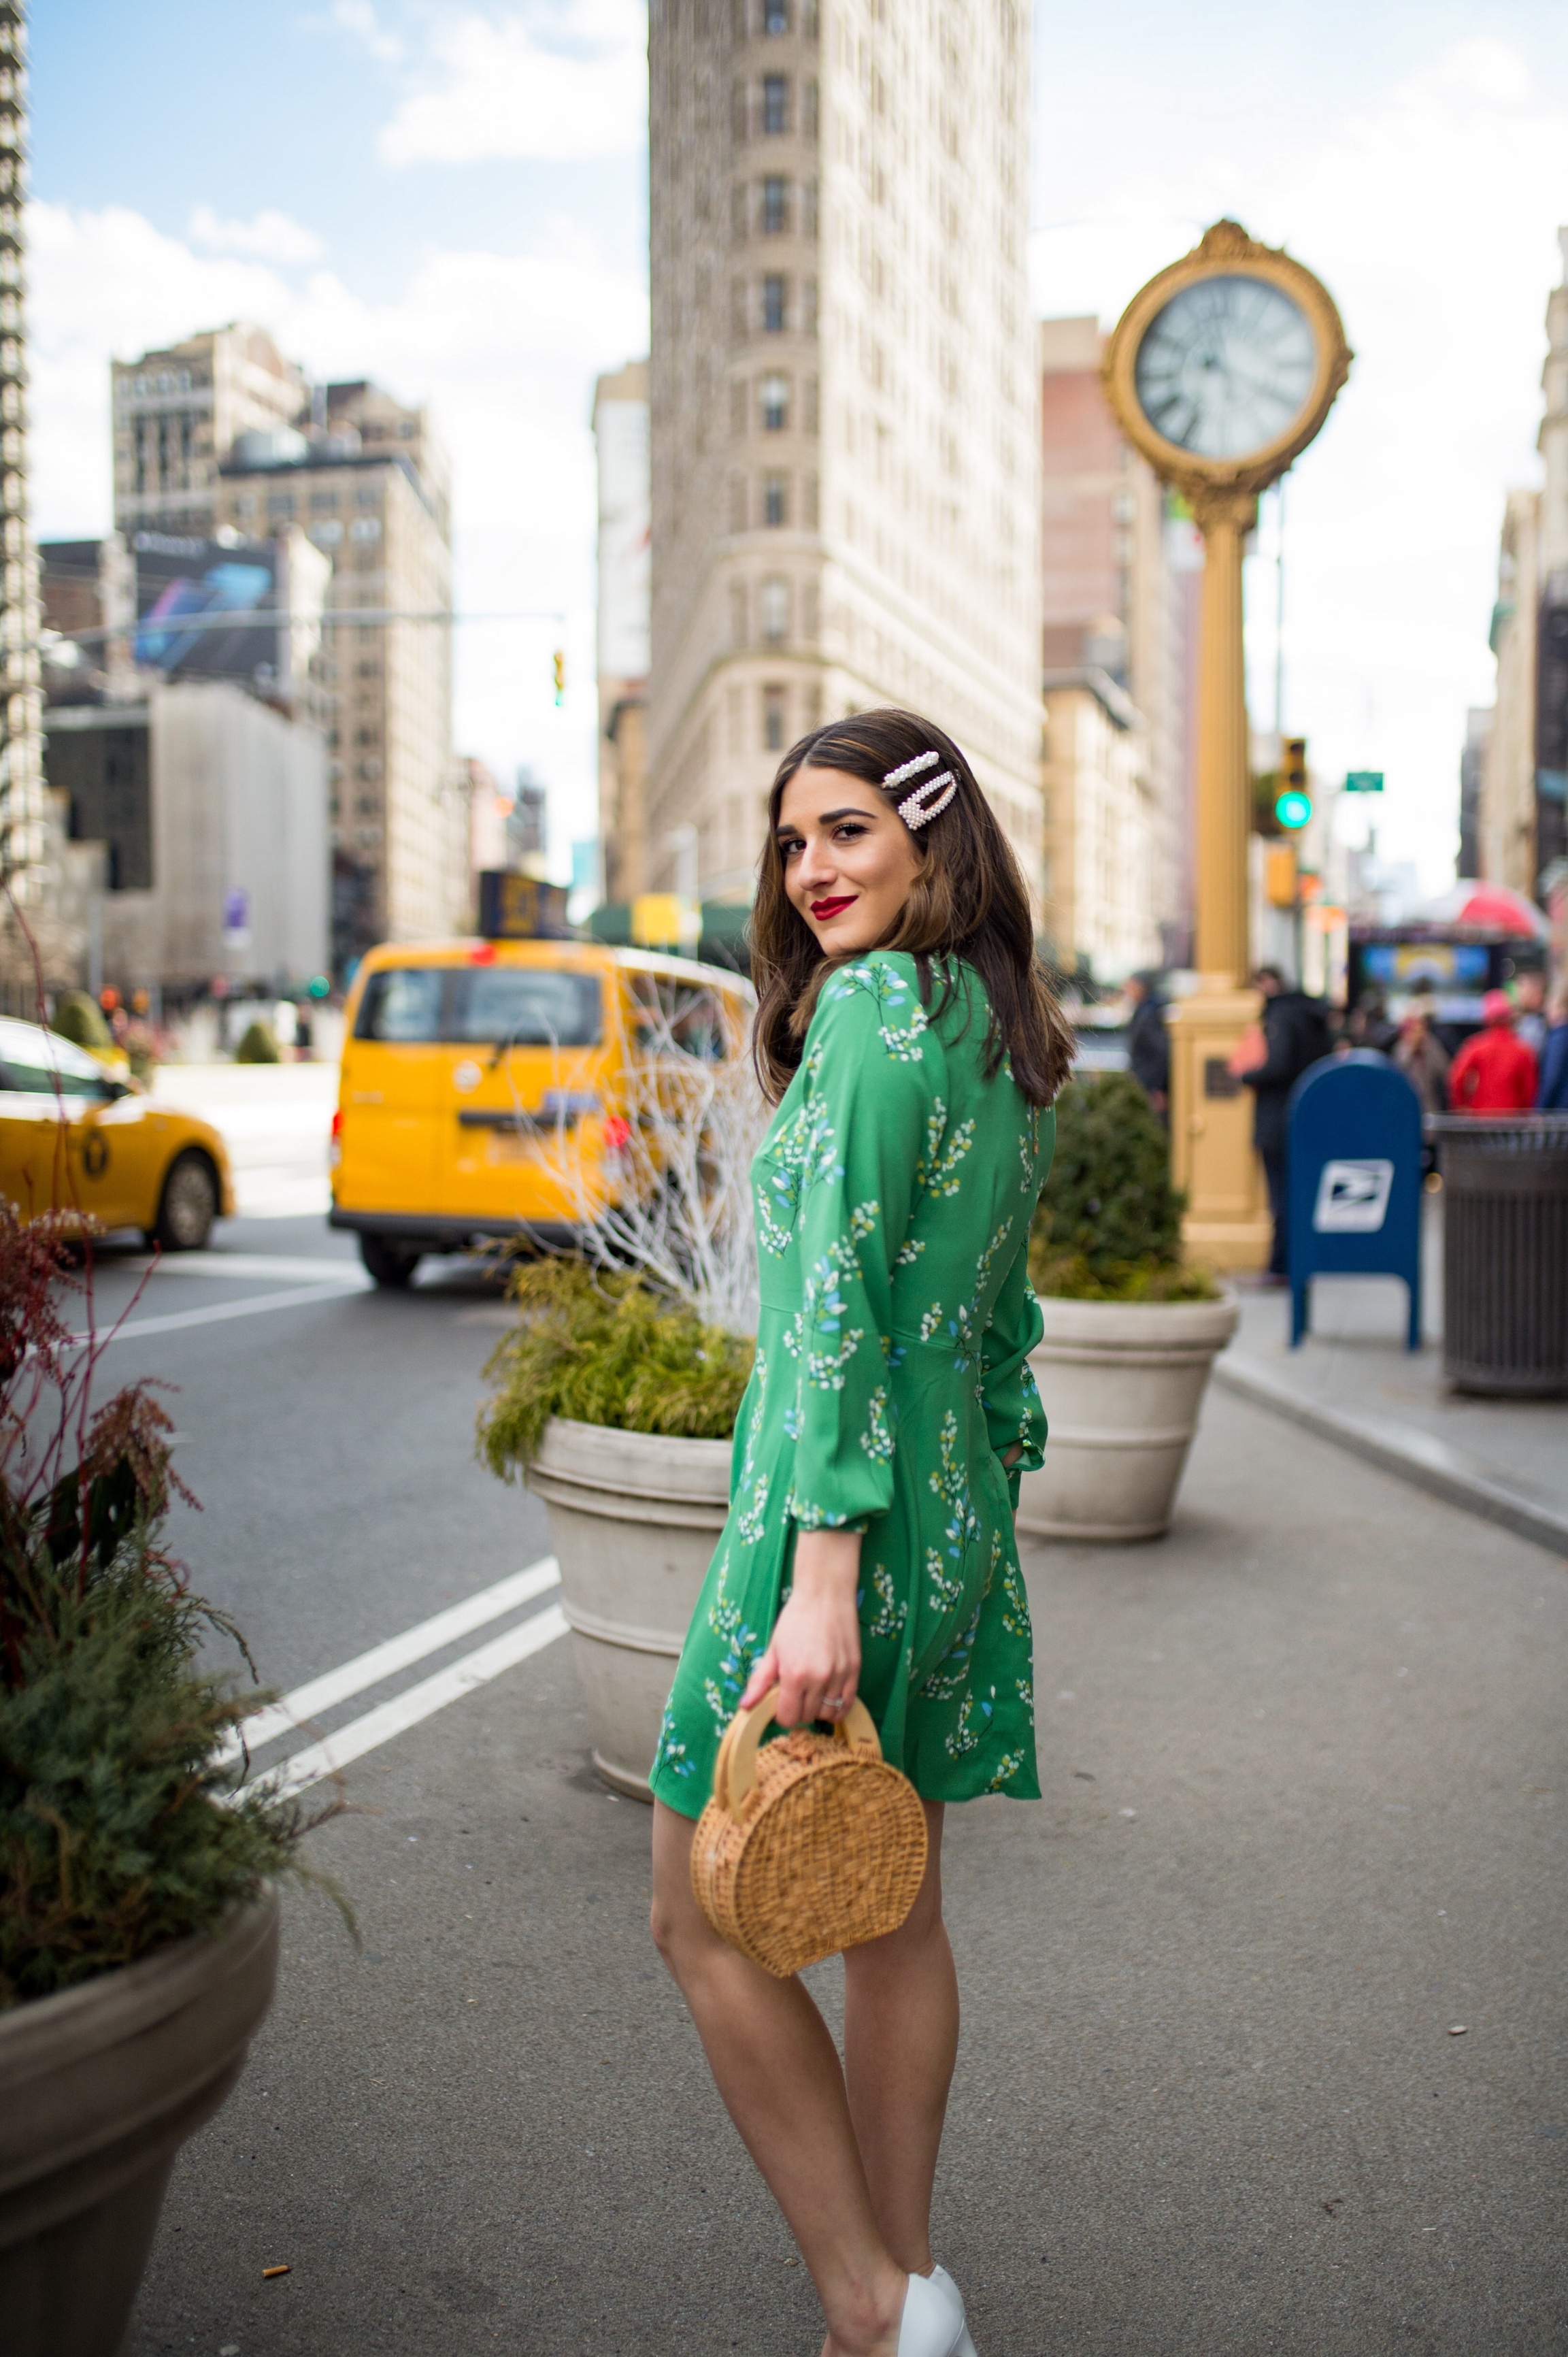 Styling Green For Spring LOFT Esther Santer Fashion Blog NYC Street Style Blogger Outfit OOTD Trendy Shopping White Heels Basket Circle Bag Florals Hair Accessories Pearl Clips Flatiron Photoshoot Inspo Inspiration Petite Dress  Inclusive Sizing Bag.jpg